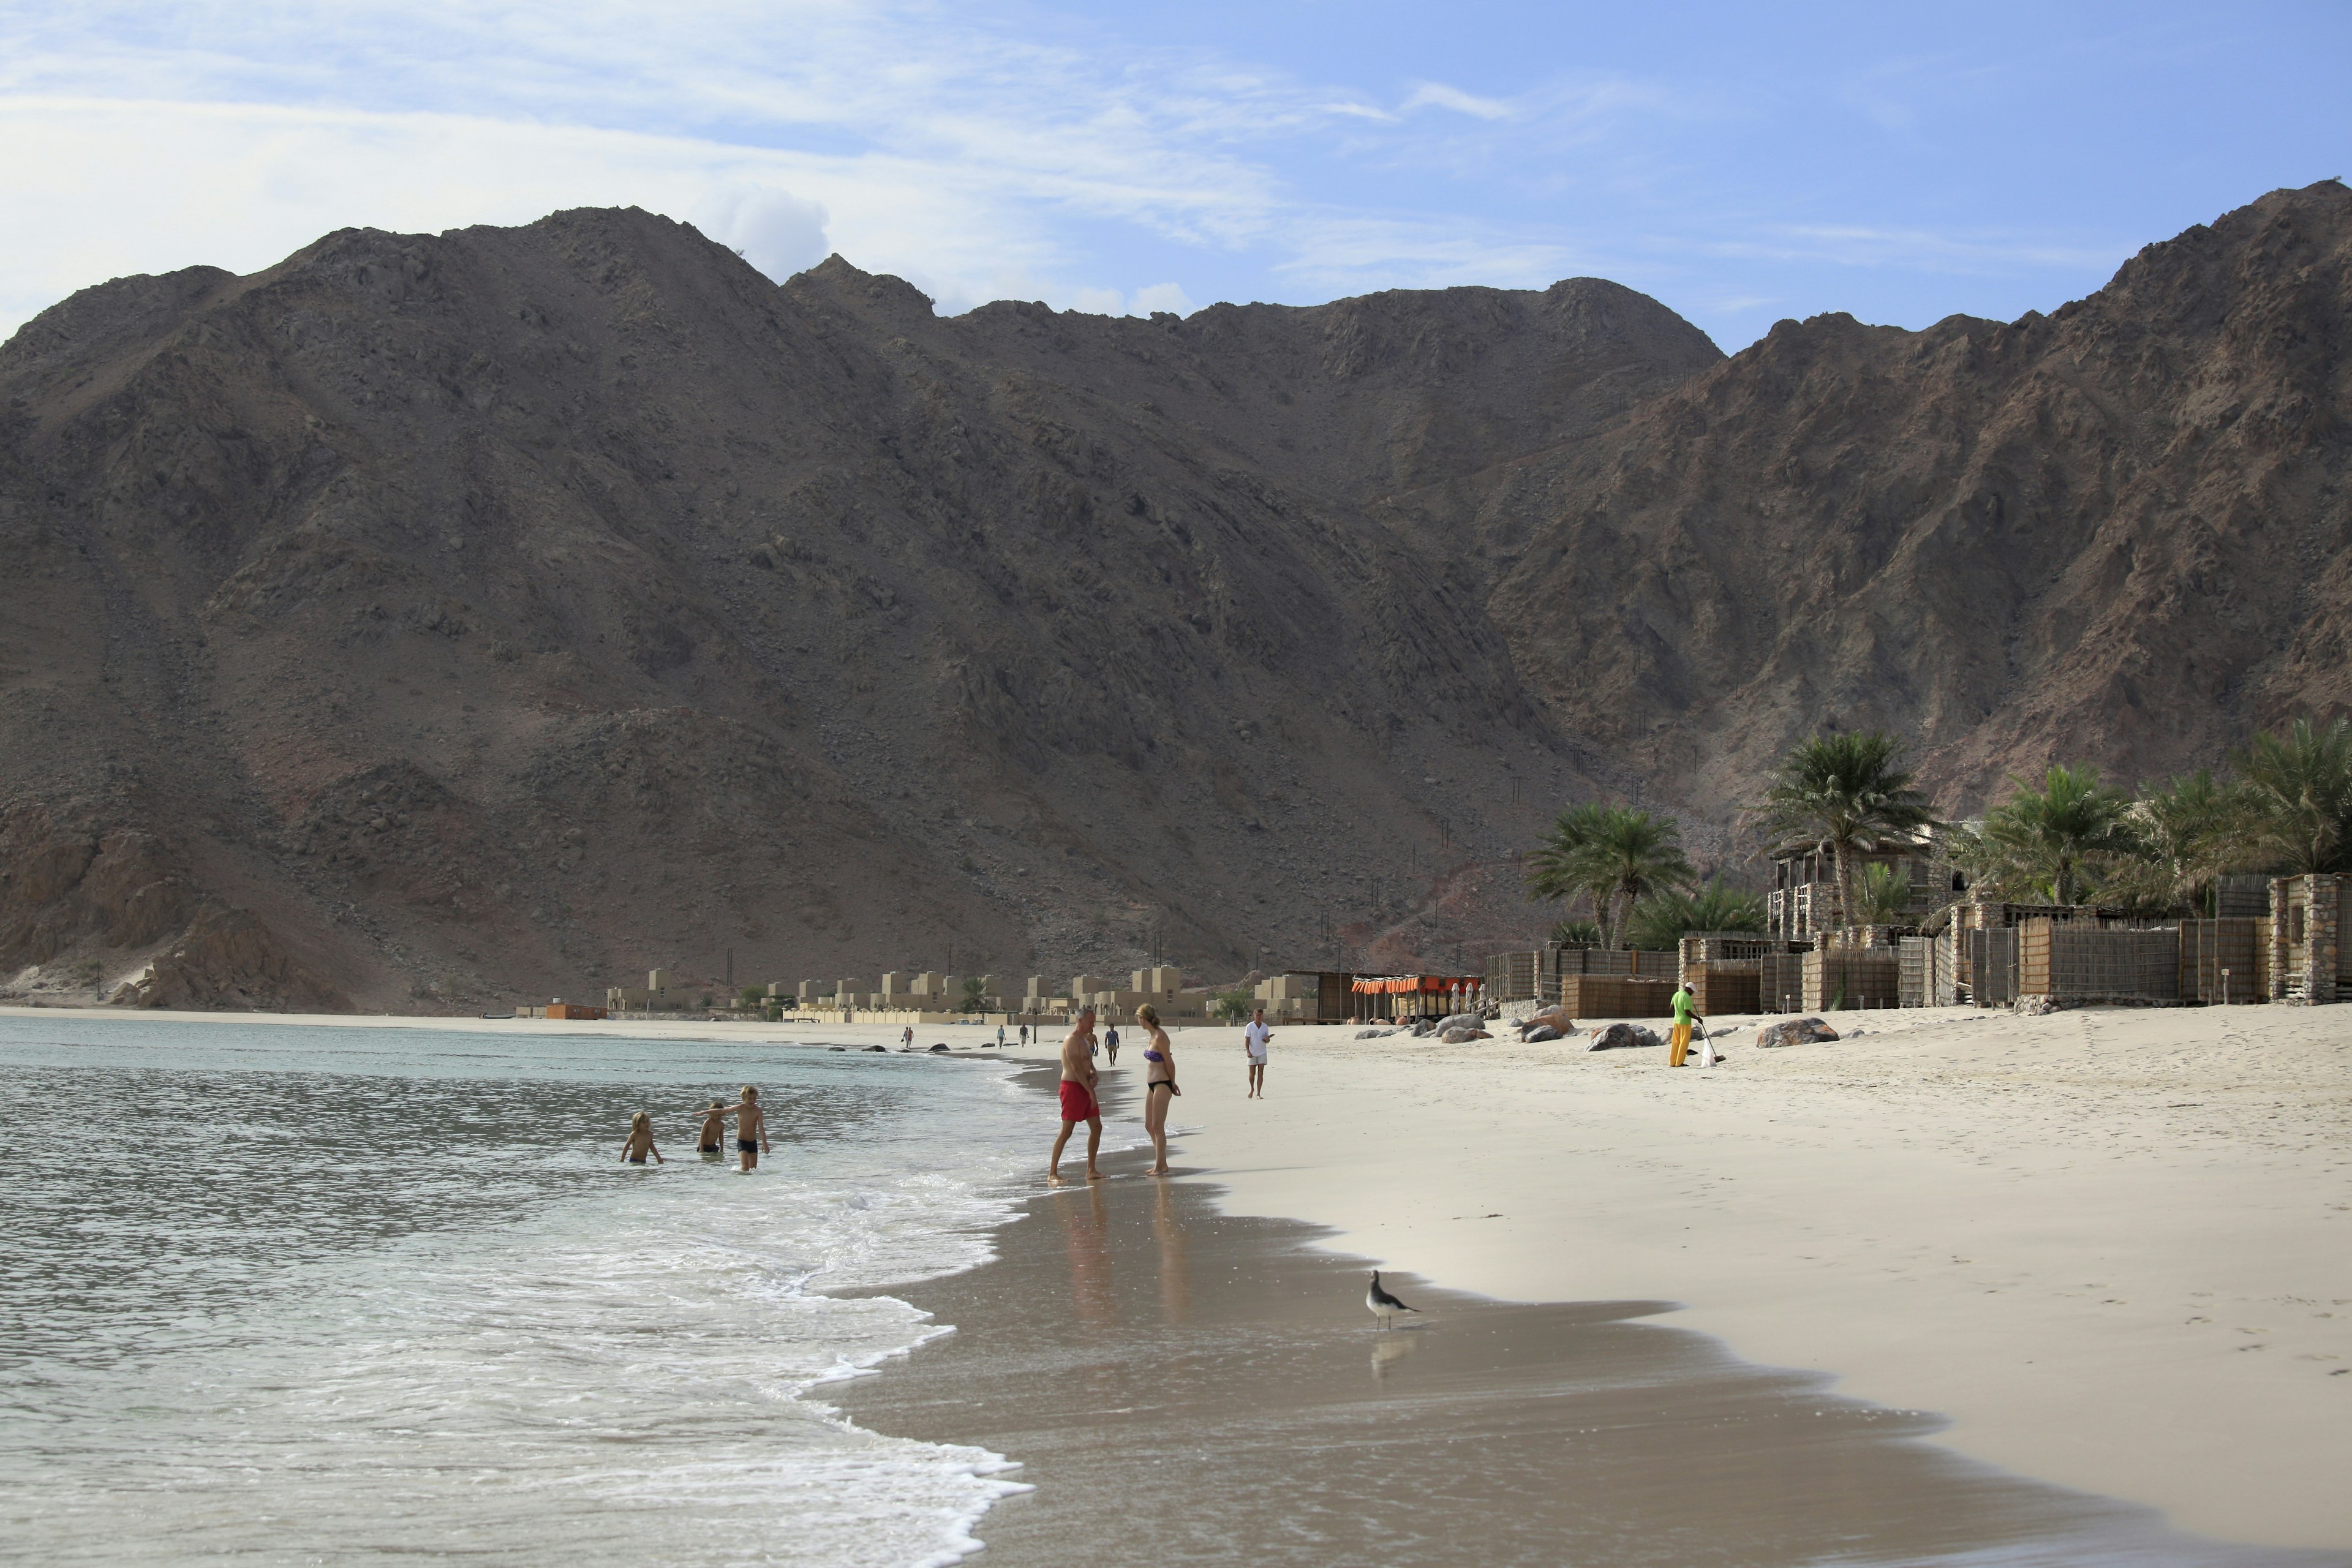 Zighy Bay, Oman - December 8, 2015: Beautifull beach, children playing and birds on the wet sand... A village can be seen in the distance, Zighy Bay, north of town of Dibba, Oman